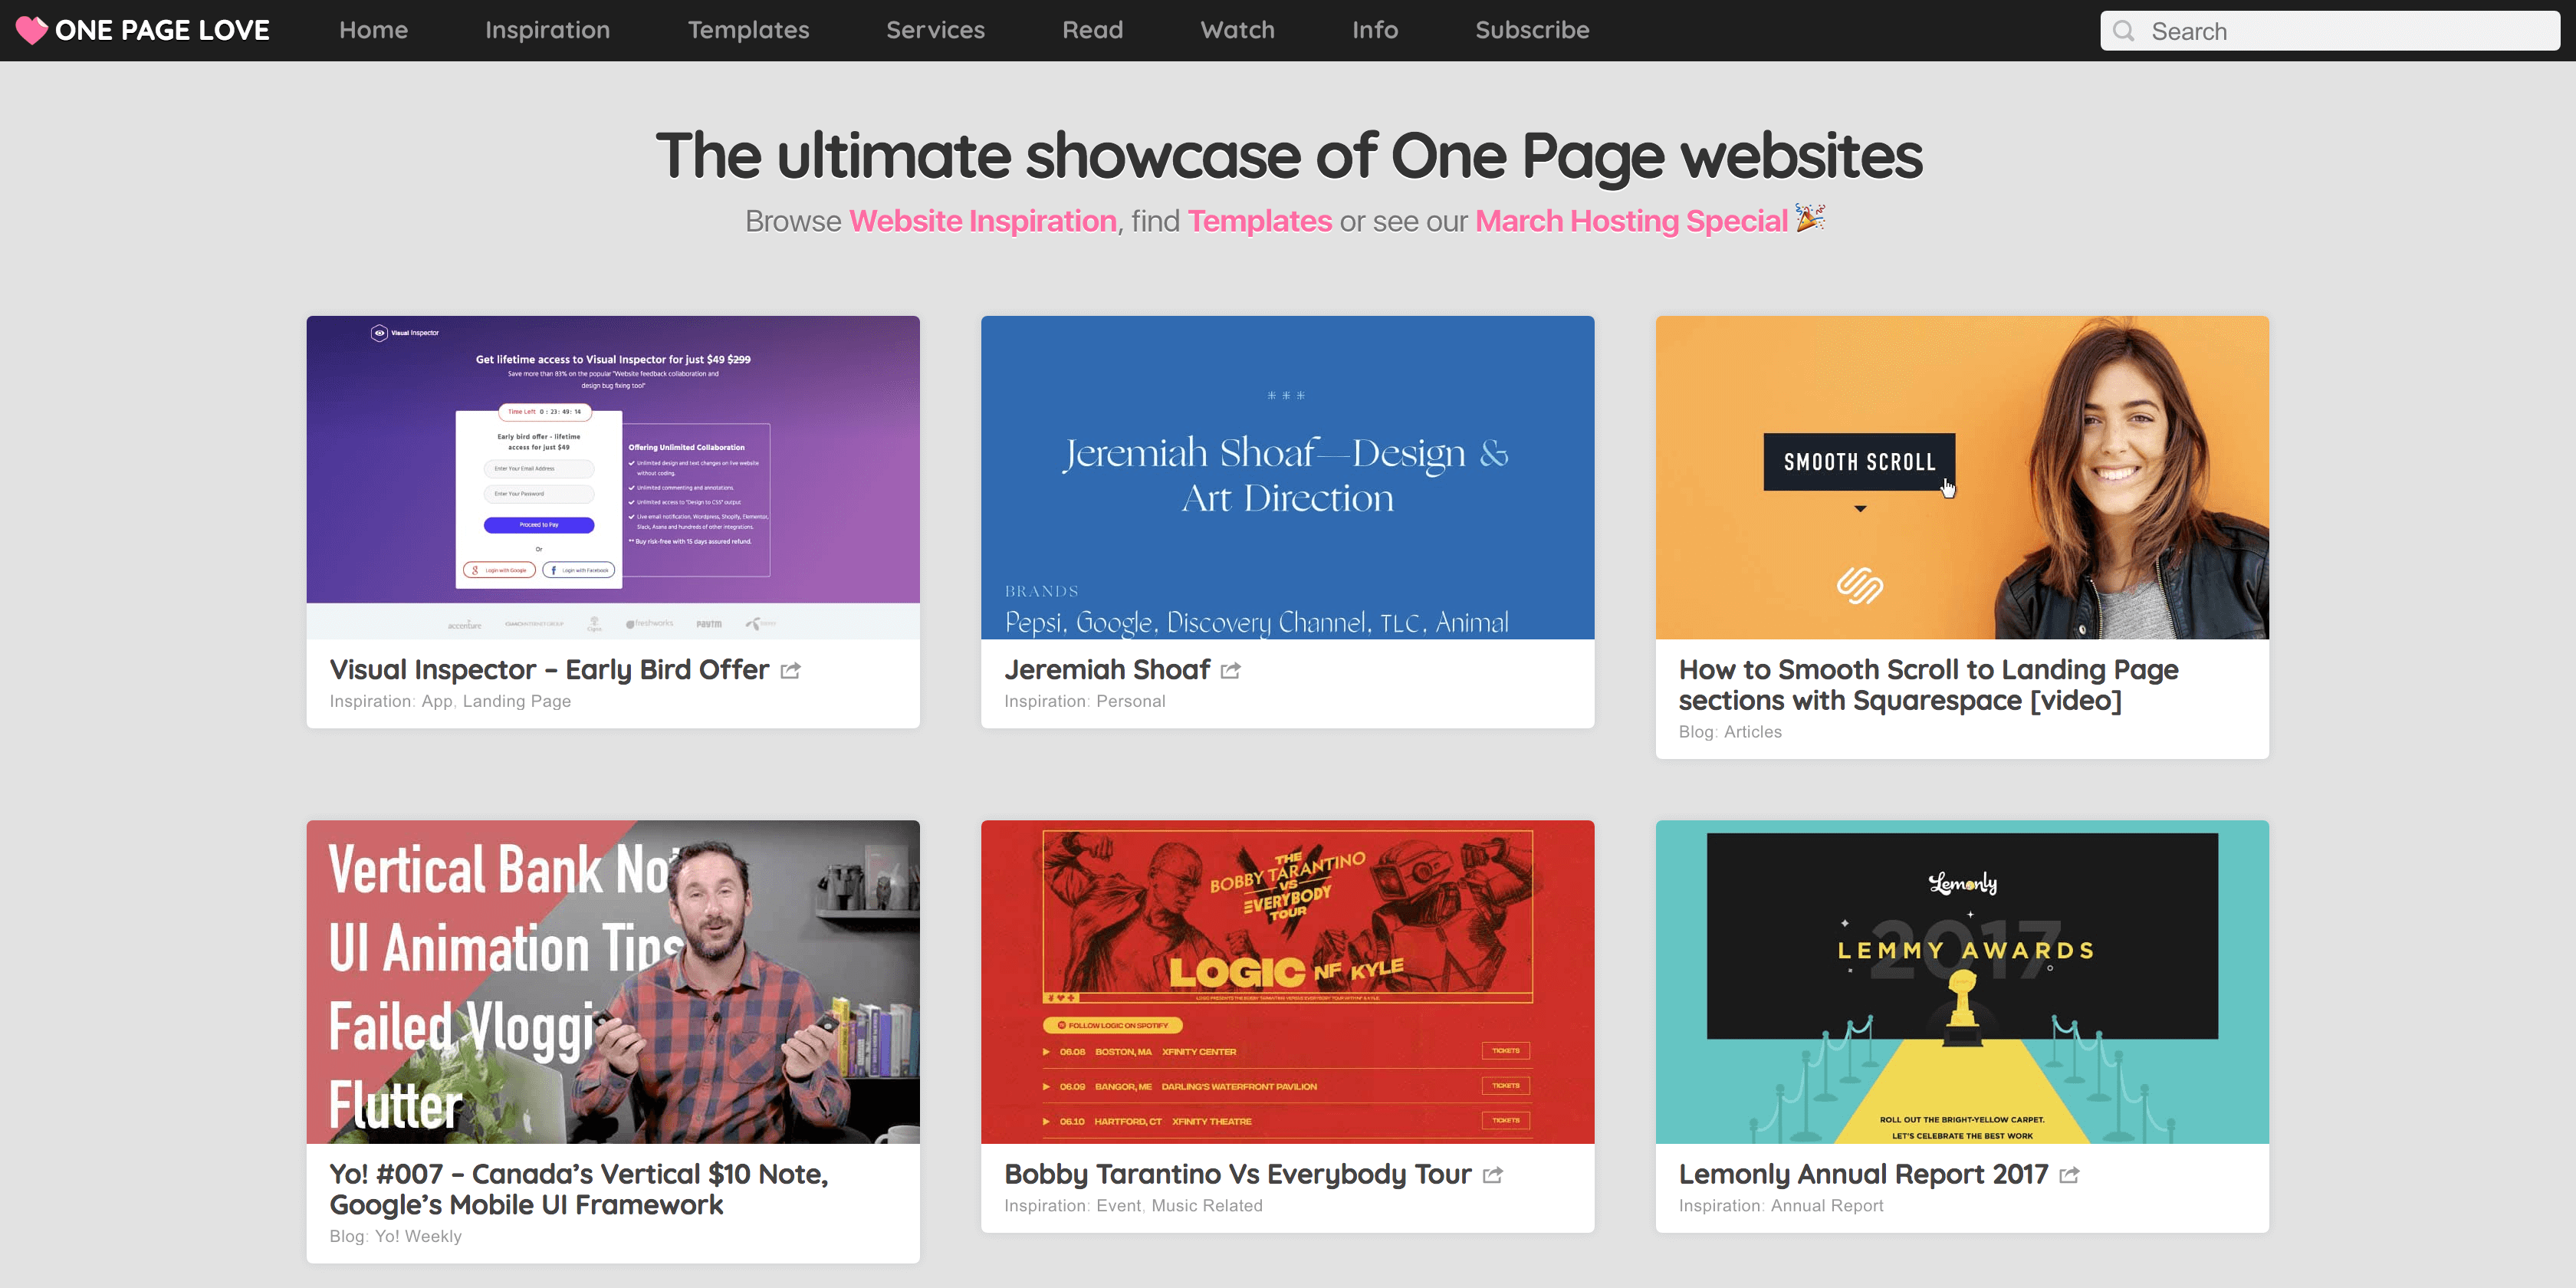 The One Page Love website.